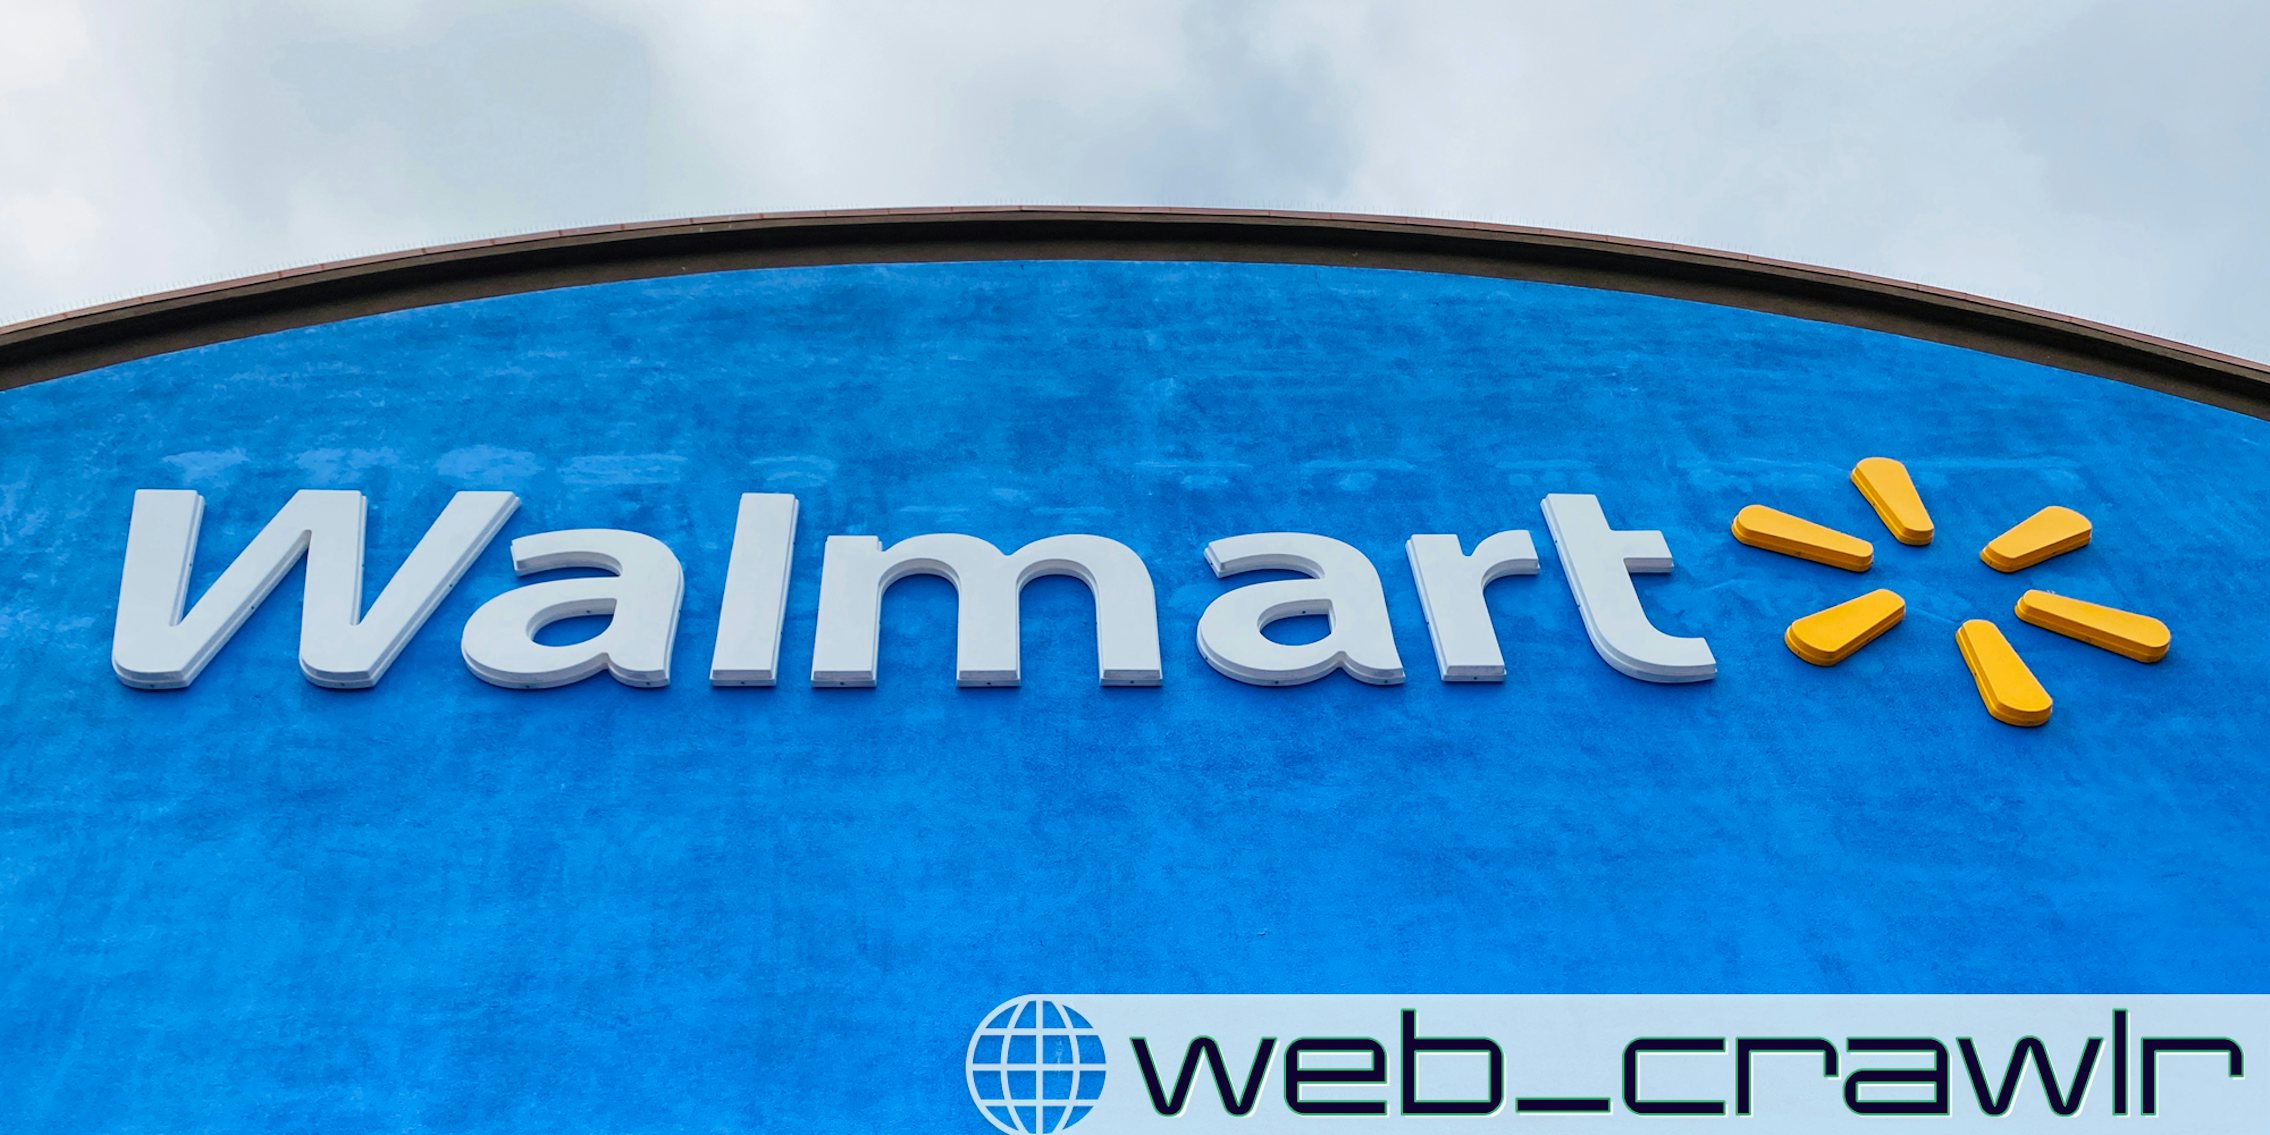 A Walmart sign. The Daily Dot newsletter web_crawlr logo is in the bottom right corner.